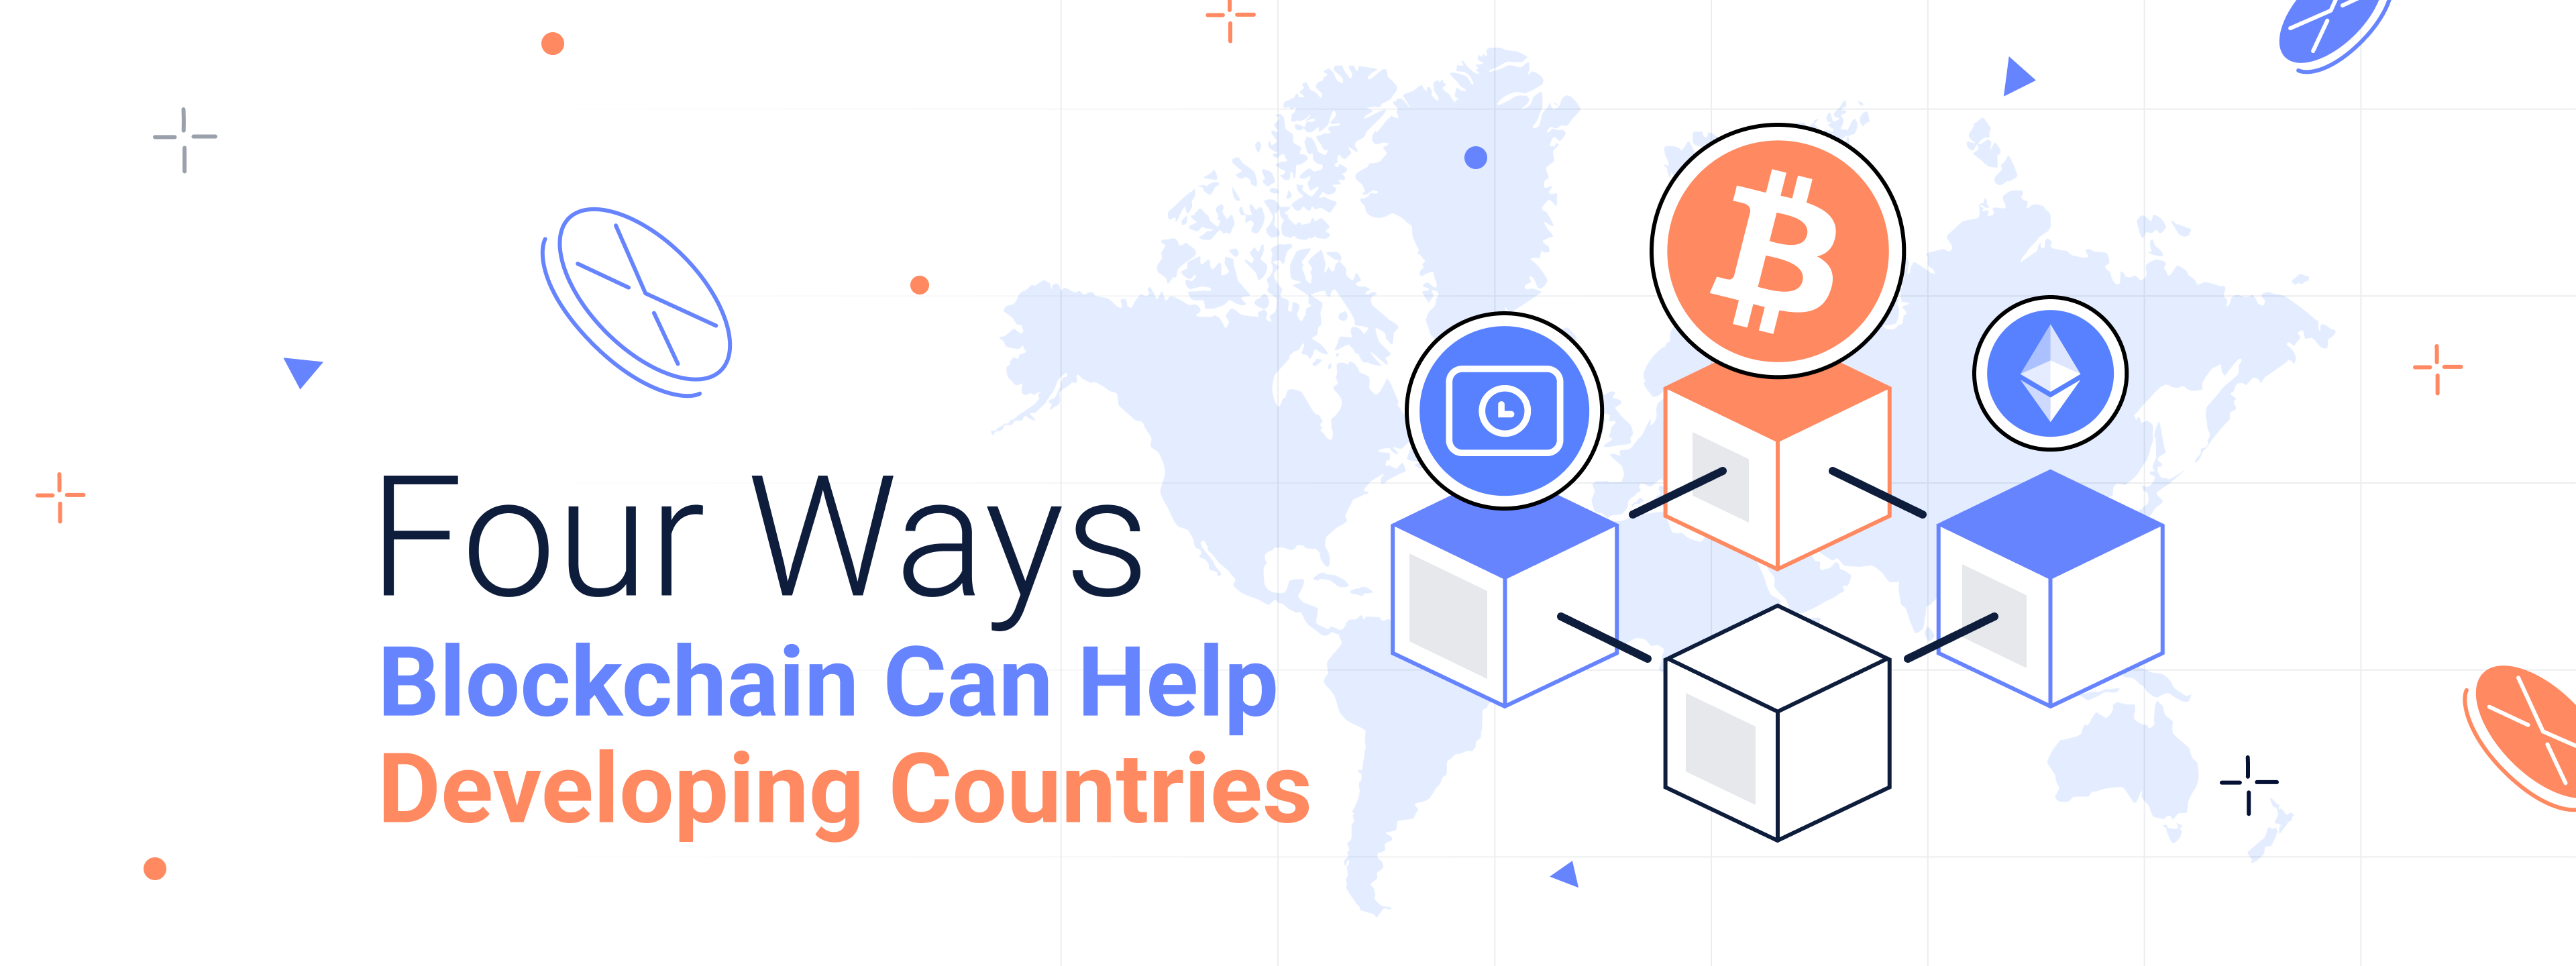 Four Ways Blockchain Can Help Developing Countries